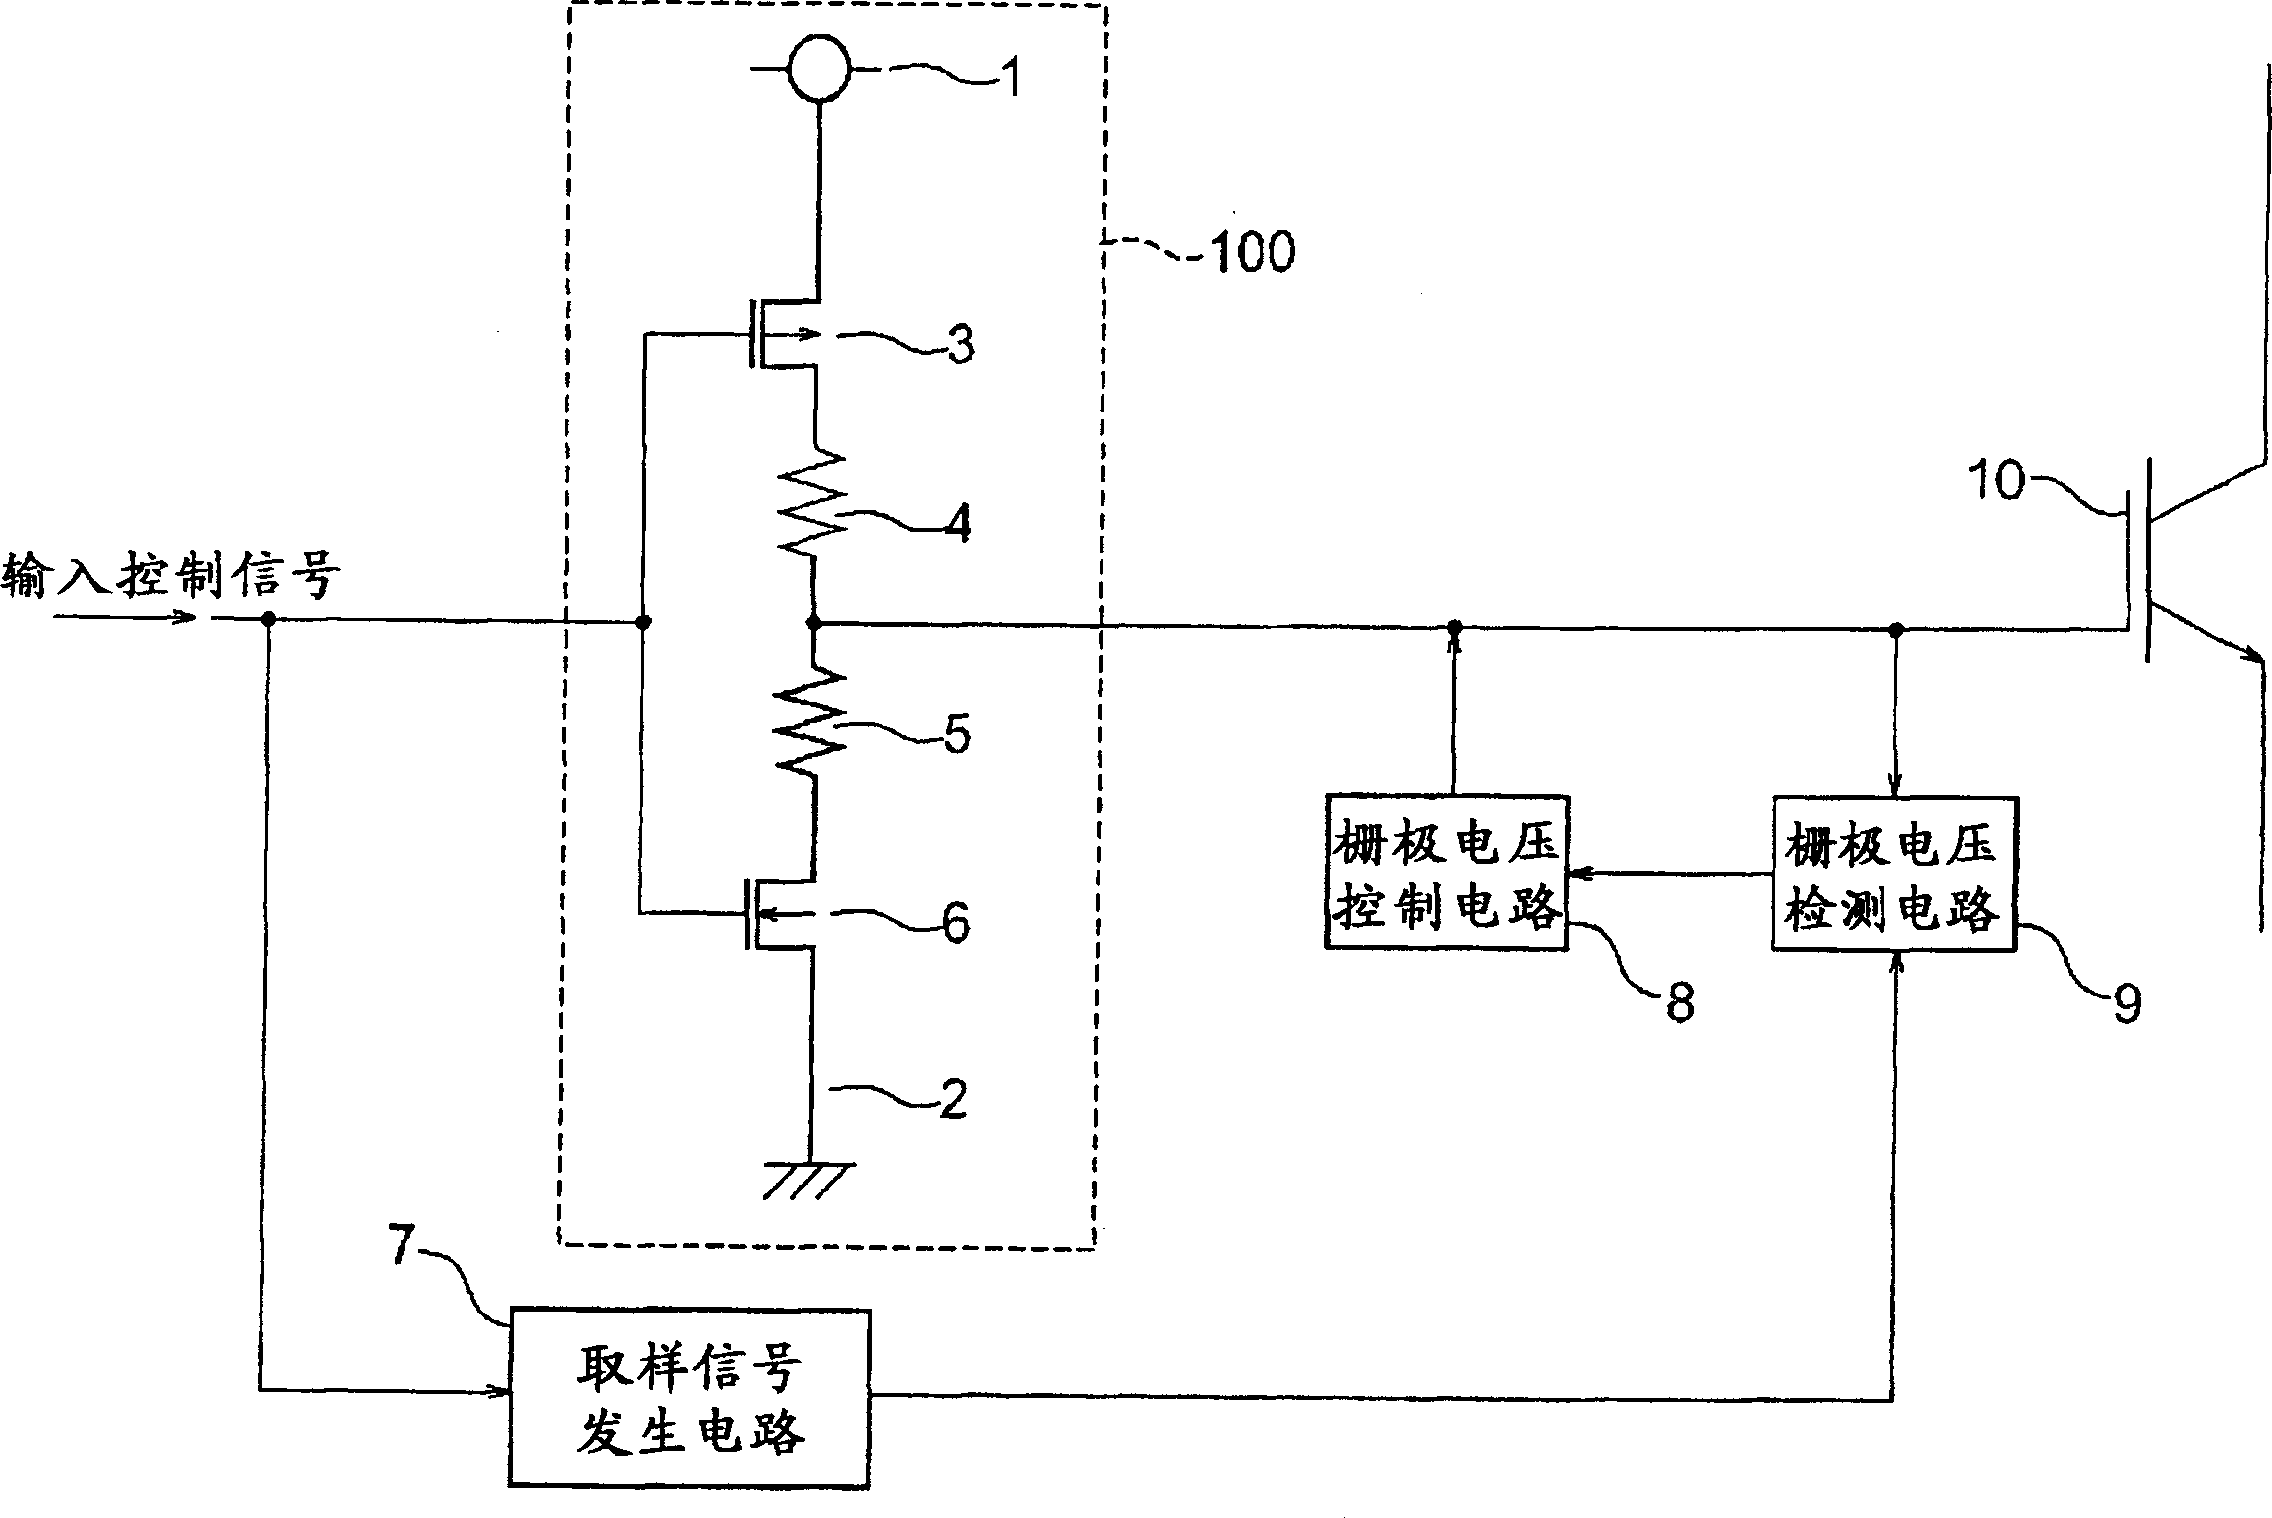 Drive circuit of power semiconductor element